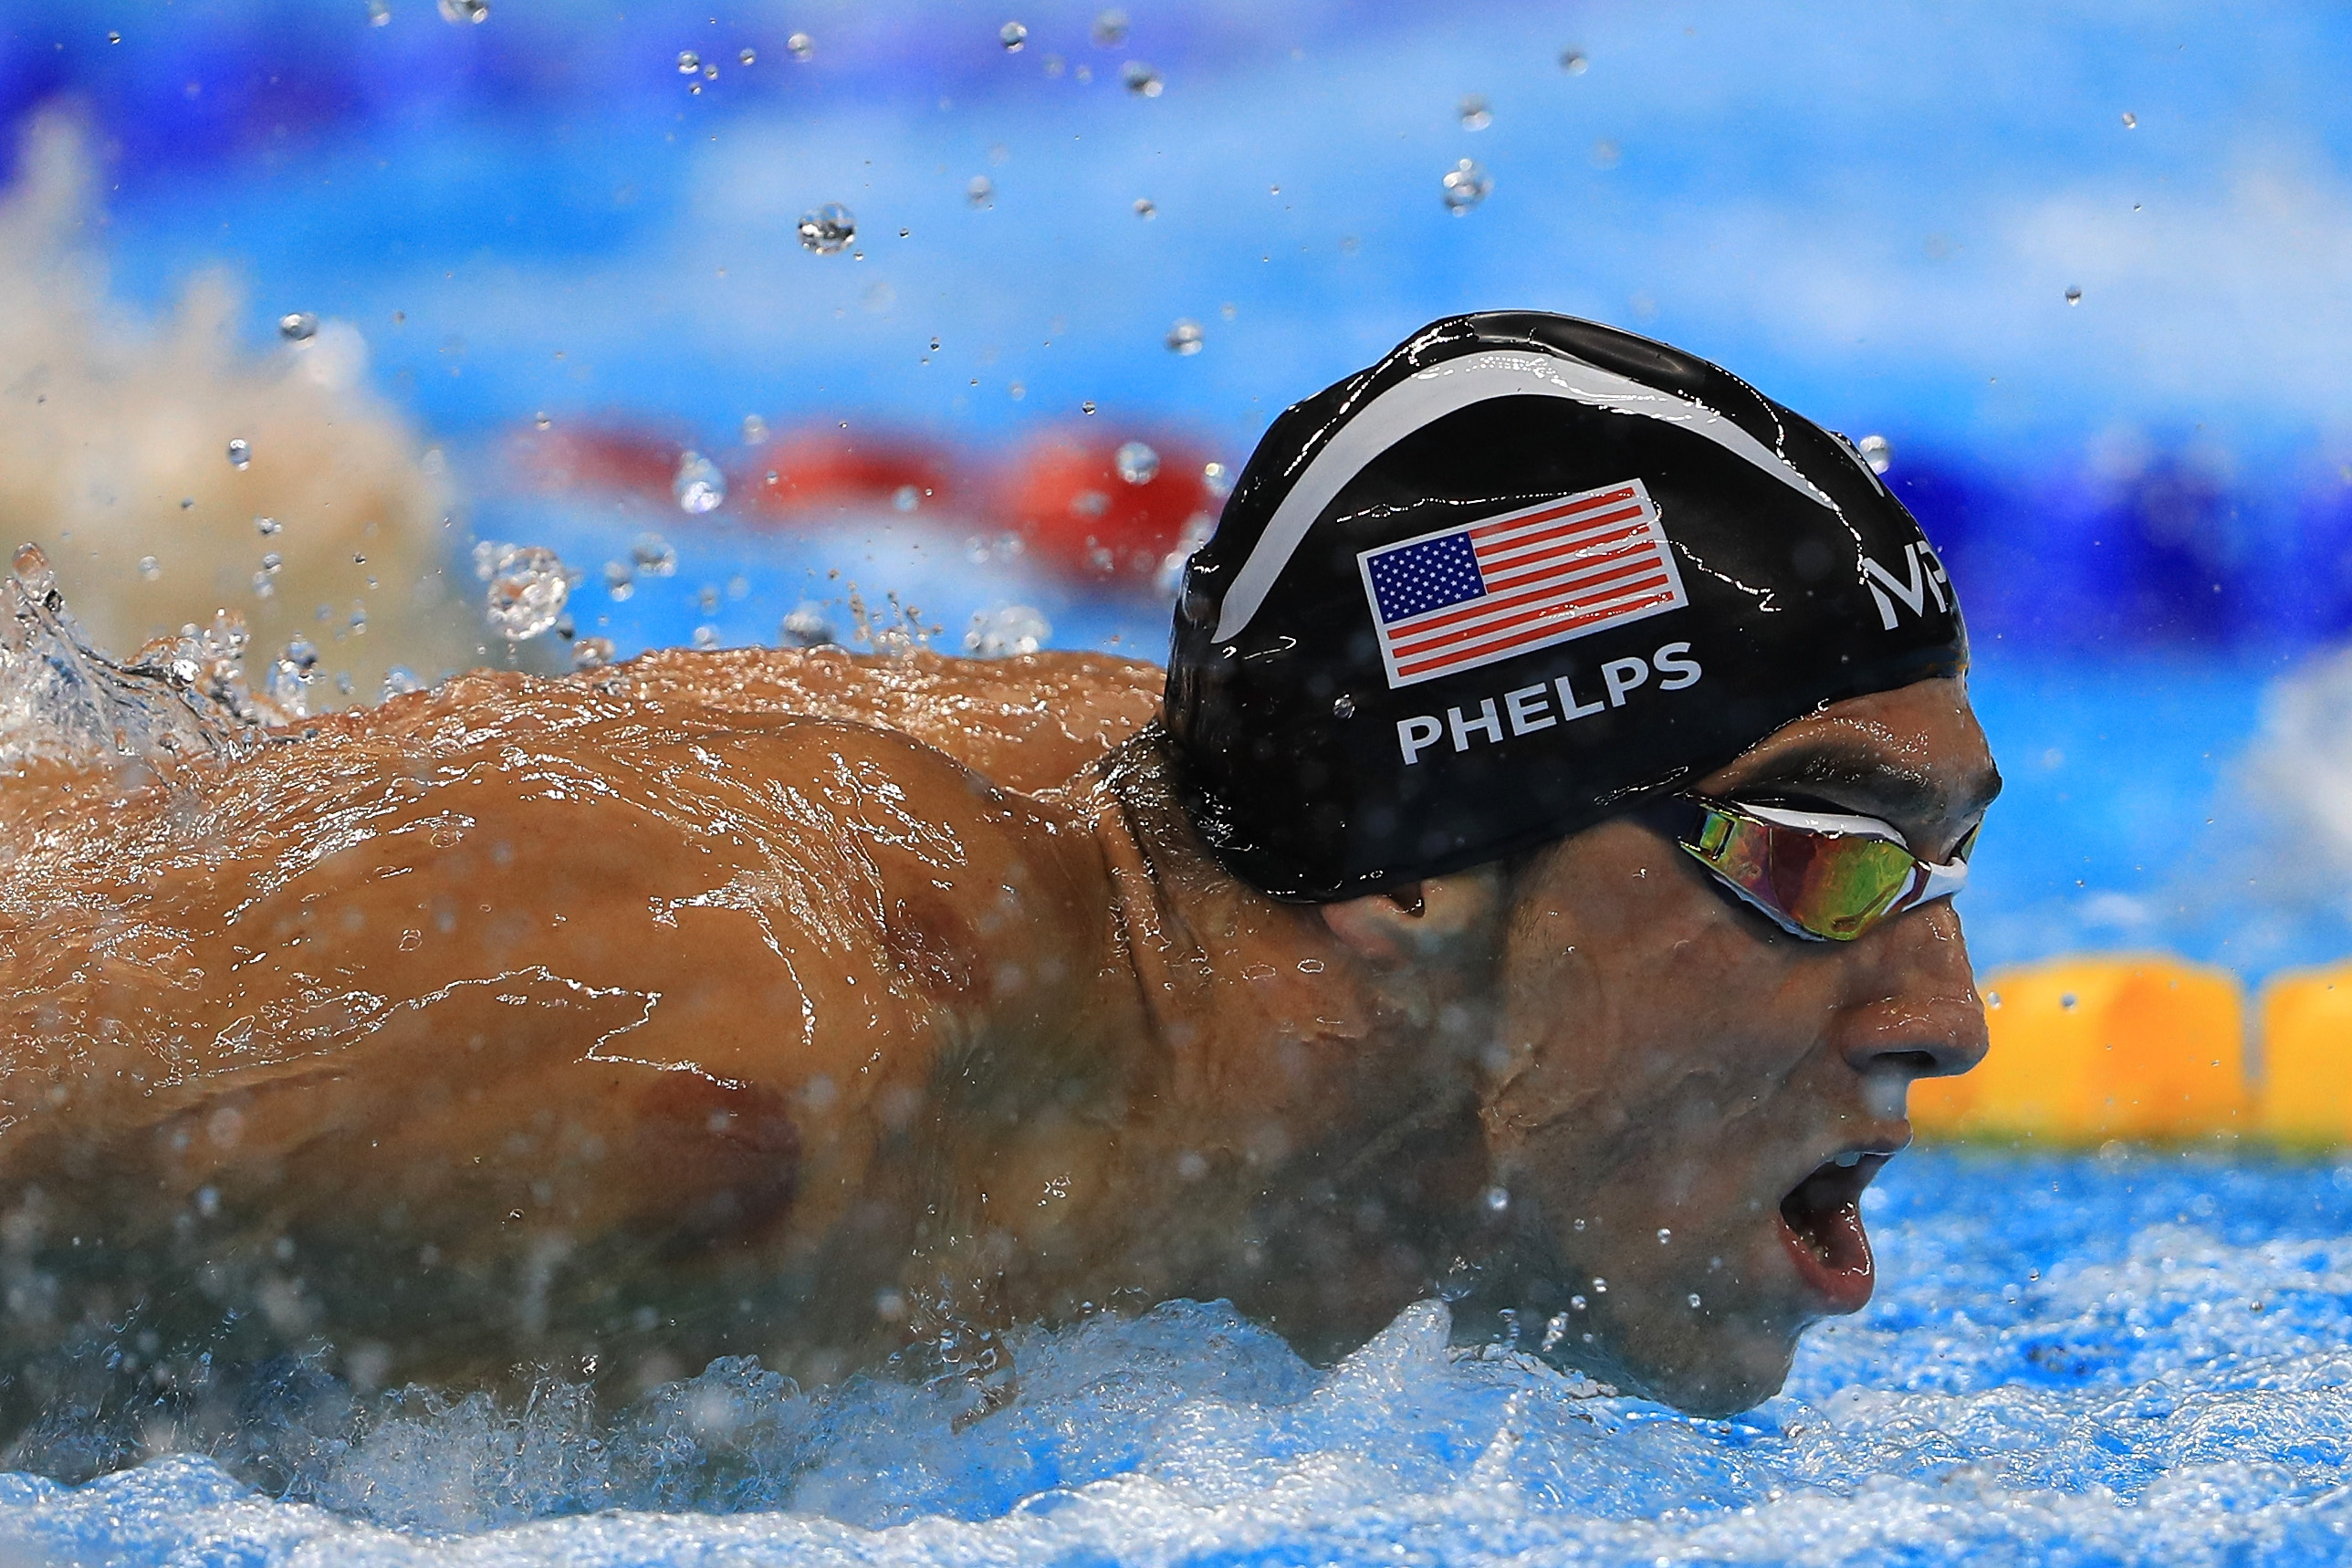 PHOTO: Michael Phelps of the United States competes in the first Semifinal of the Men's 100m Butterfly on Day 6 of the Rio 2016 Olympic Games at the Olympic Aquatics Stadium on Aug. 11, 2016 in Rio de Janeiro.